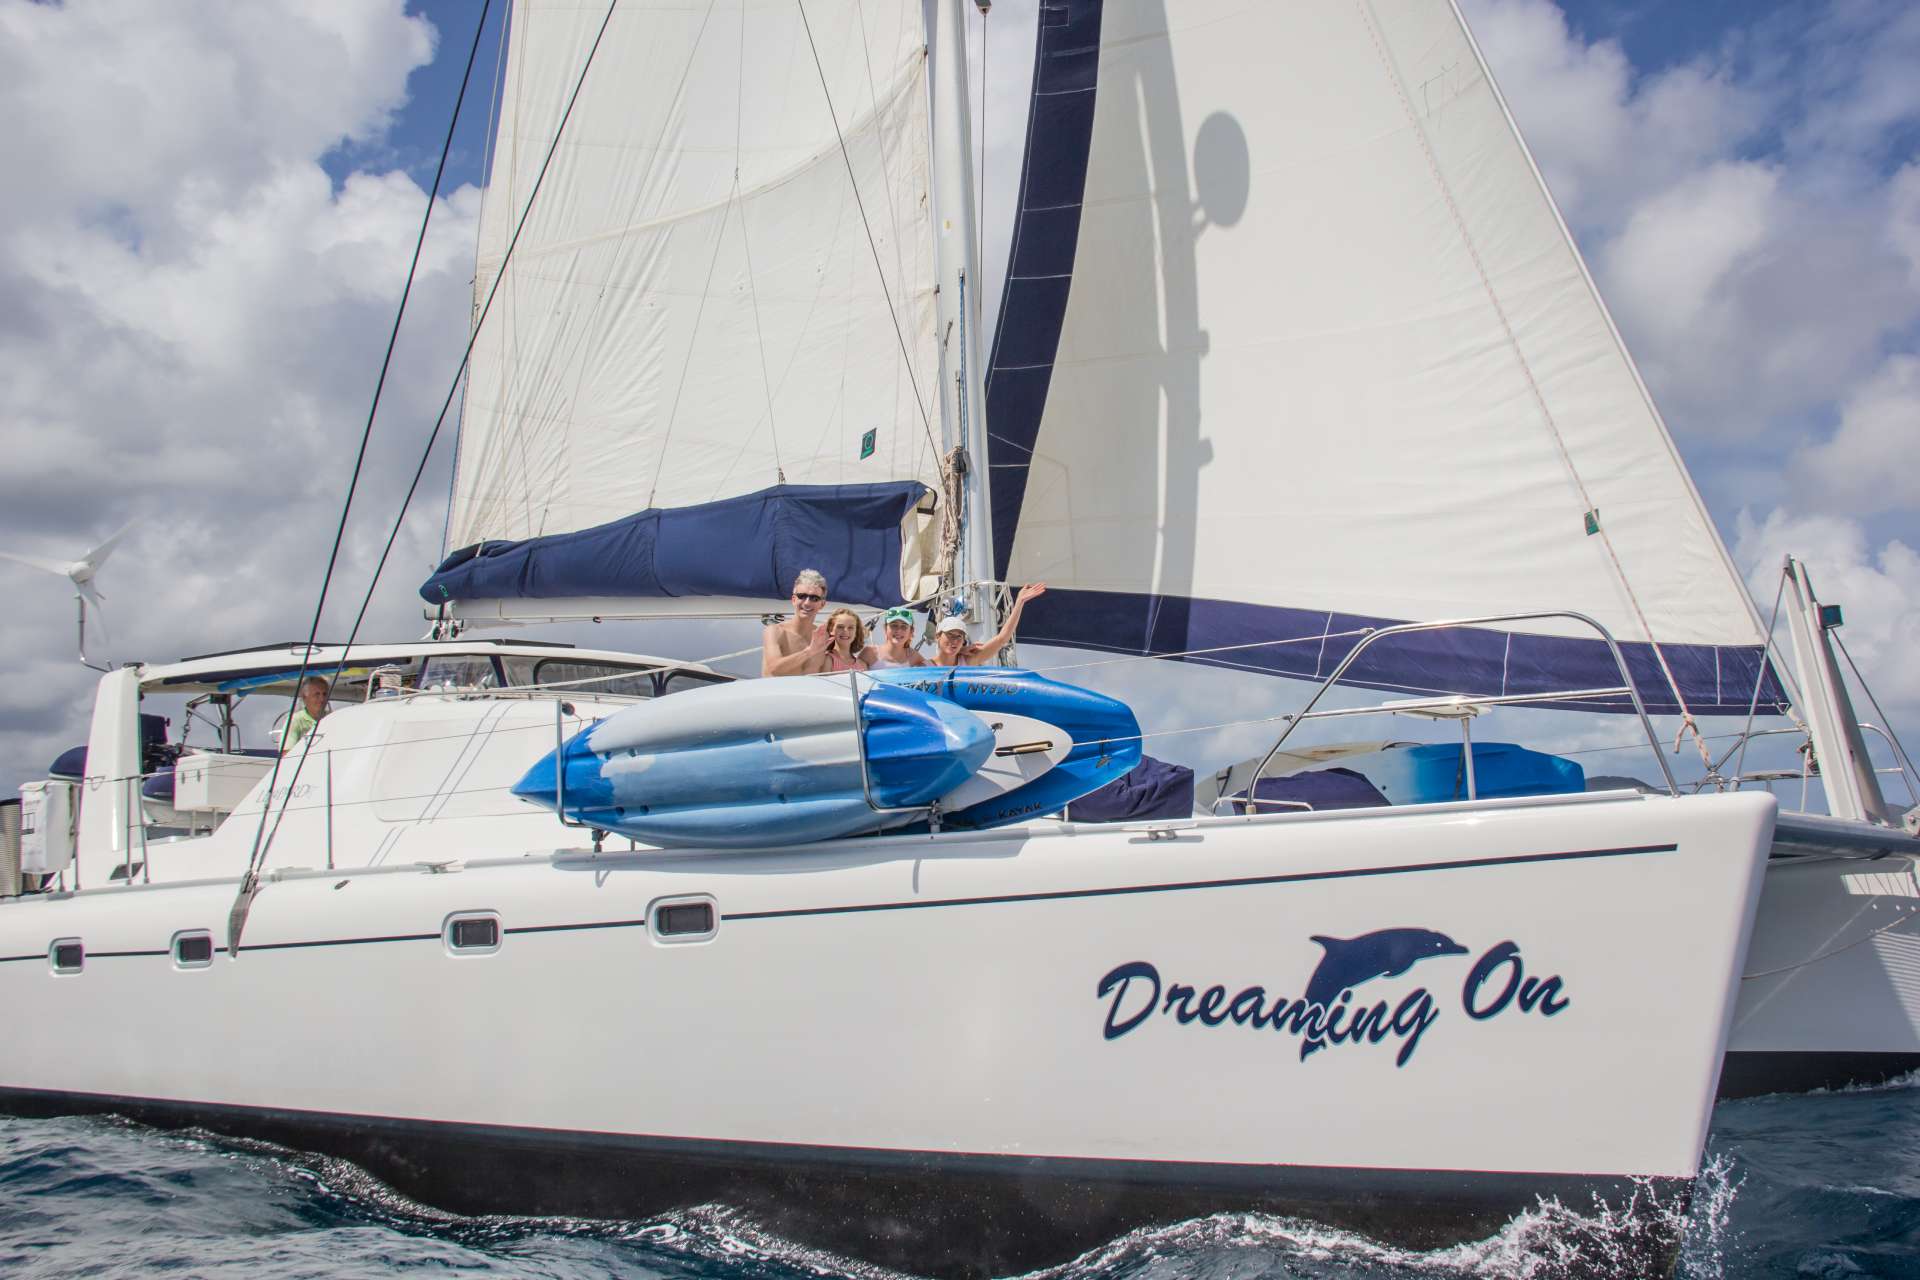 dreaming on - Yacht Charter Belize & Boat hire in Central america, Belize 2